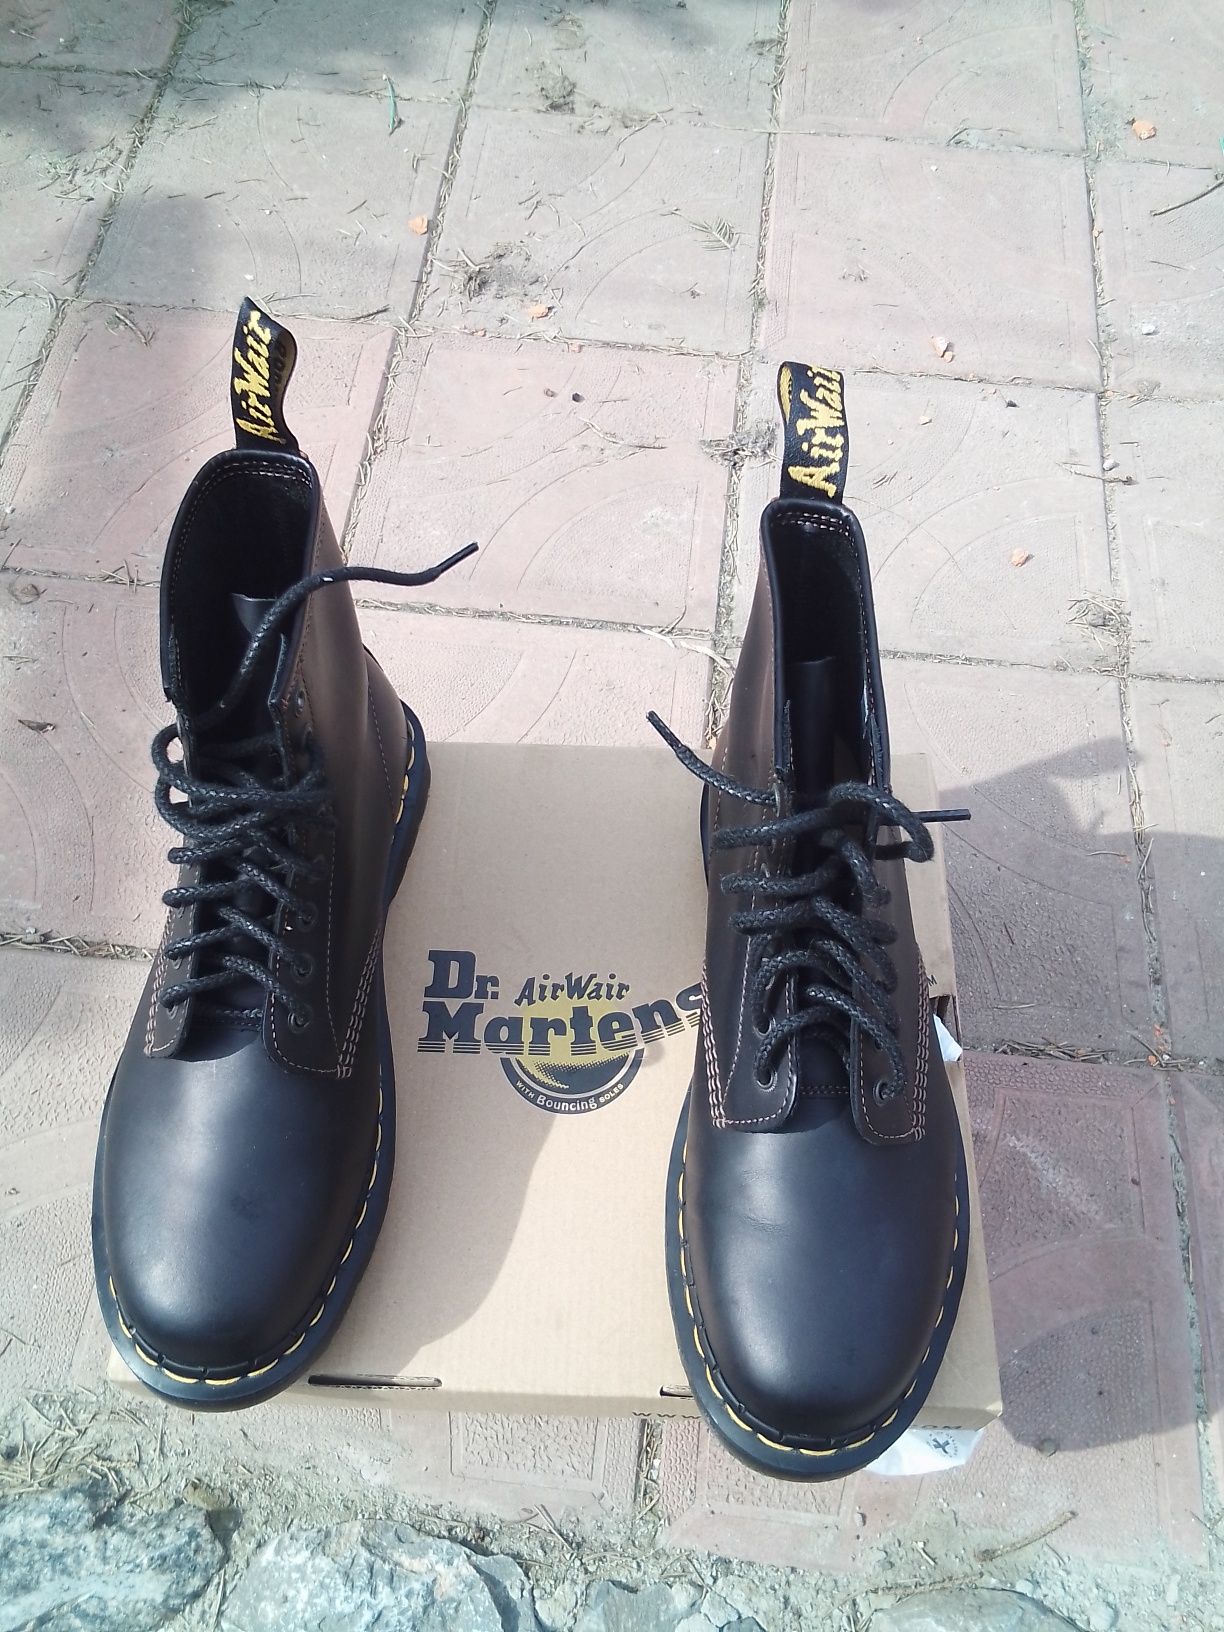 Dr. Martens 1460 Abruzzo WP Leather Ankle Boots Black+Brown